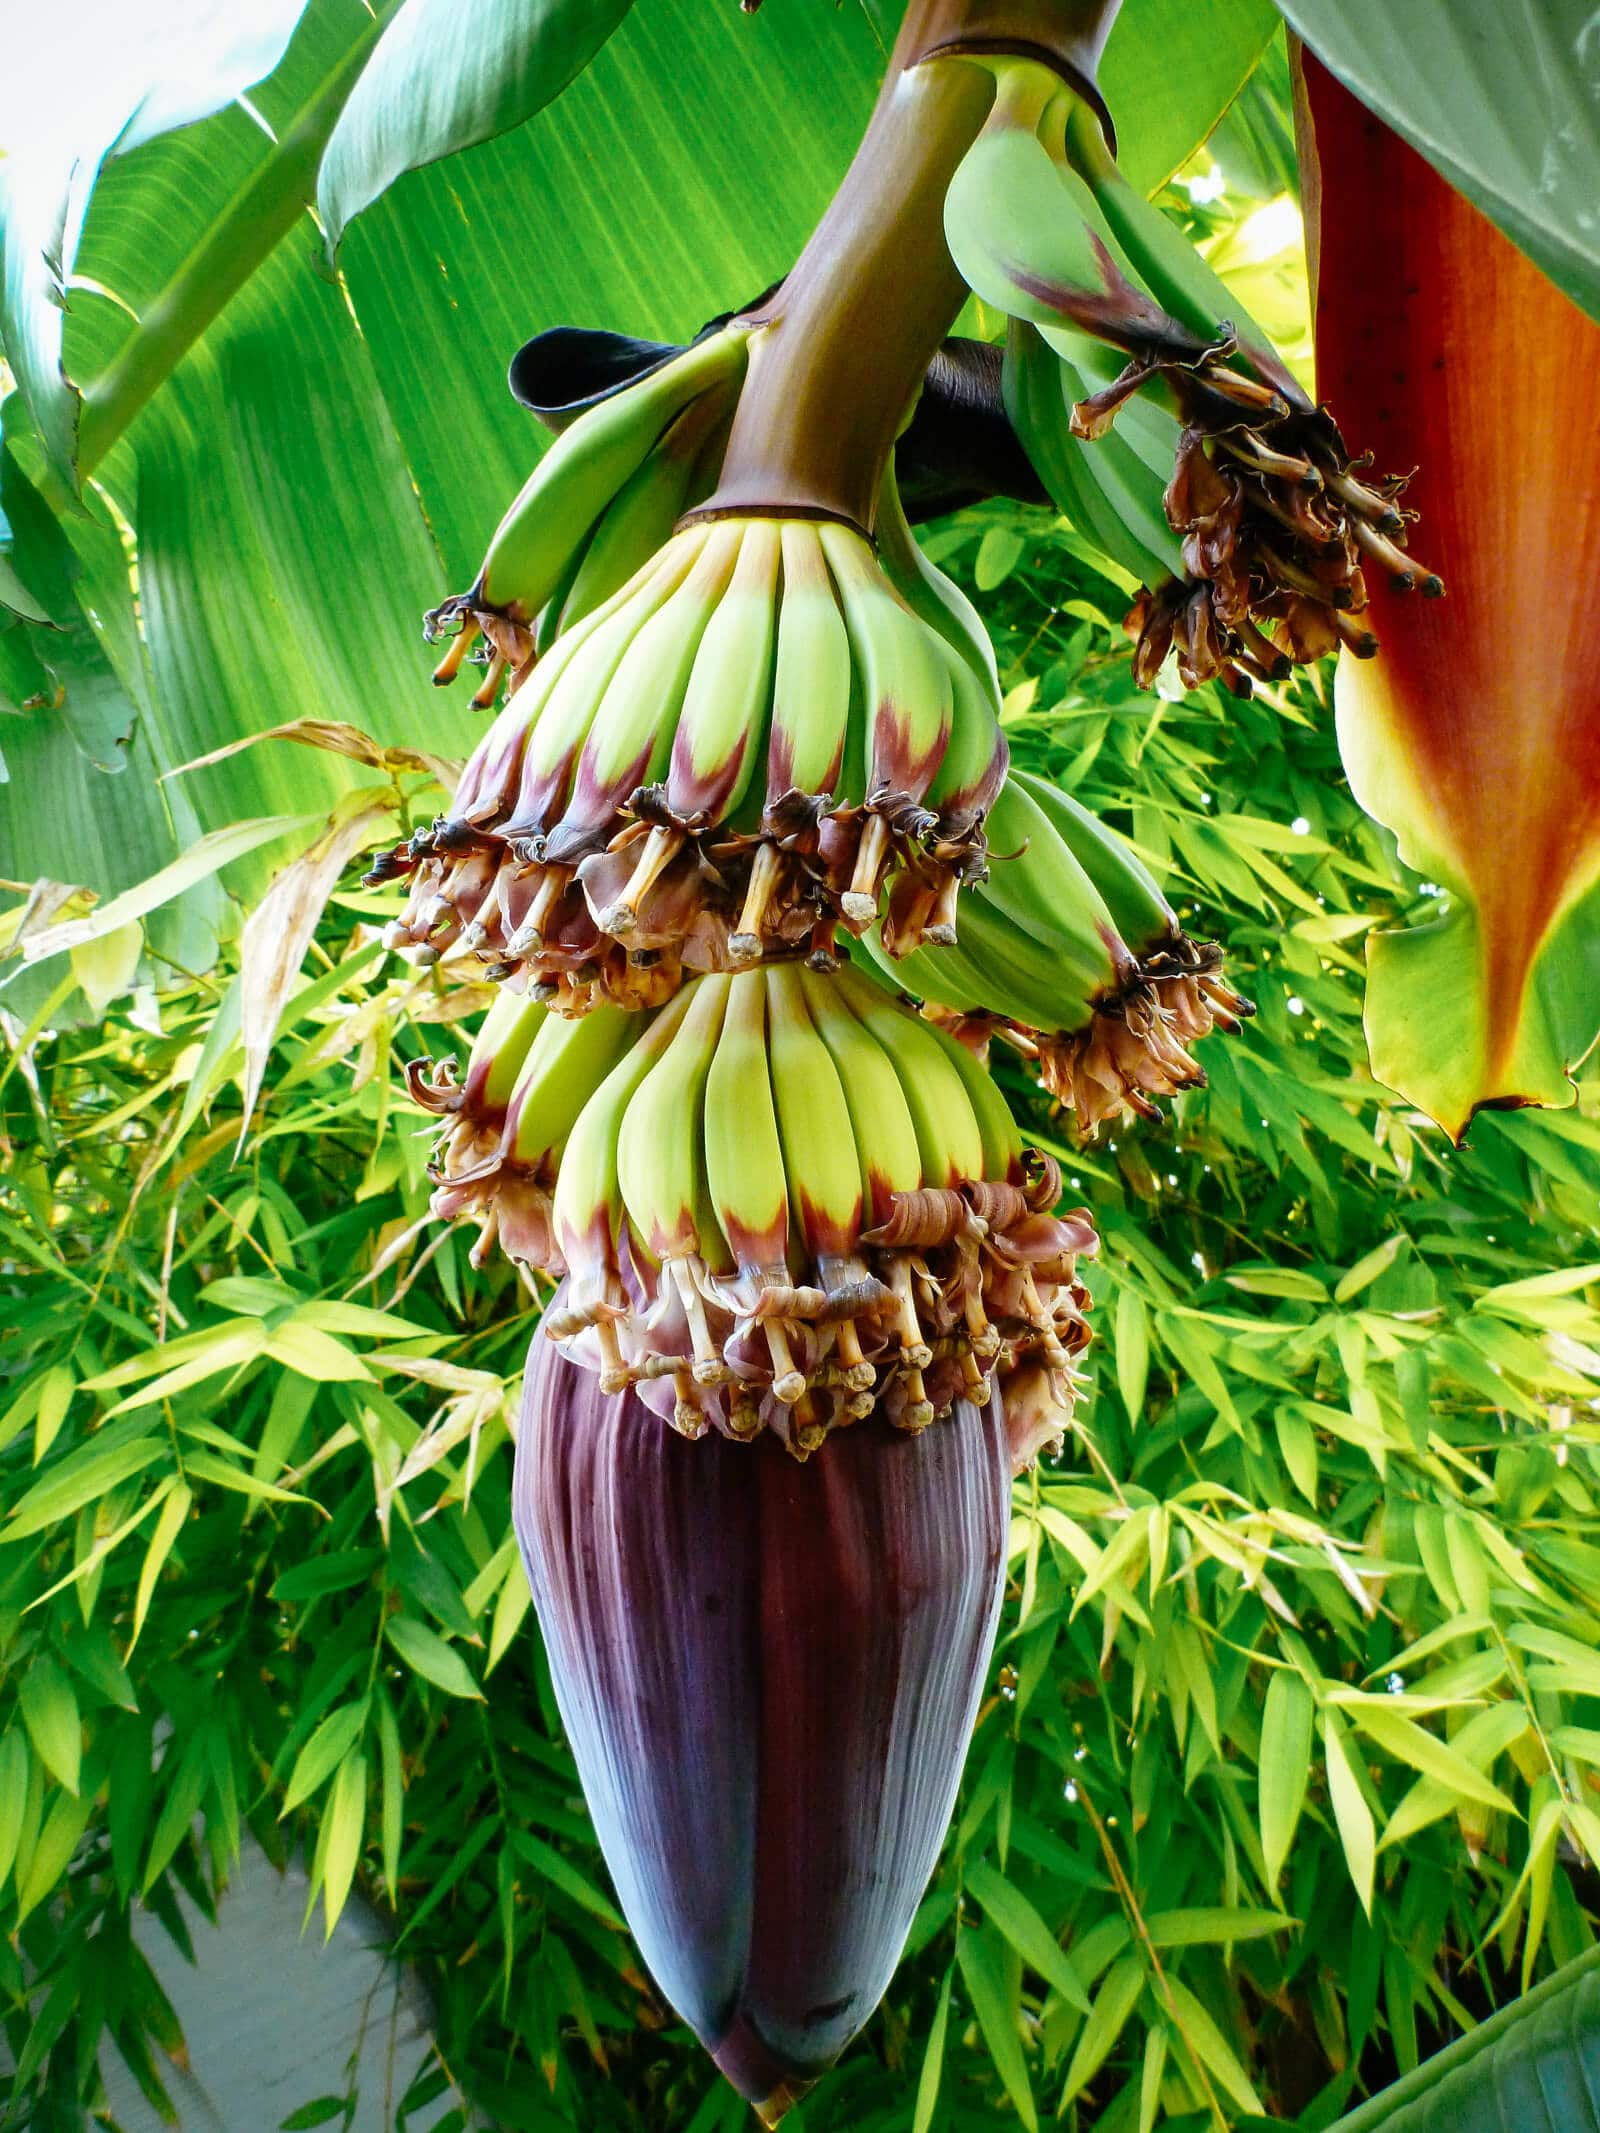 Young bananas growing on a single plant